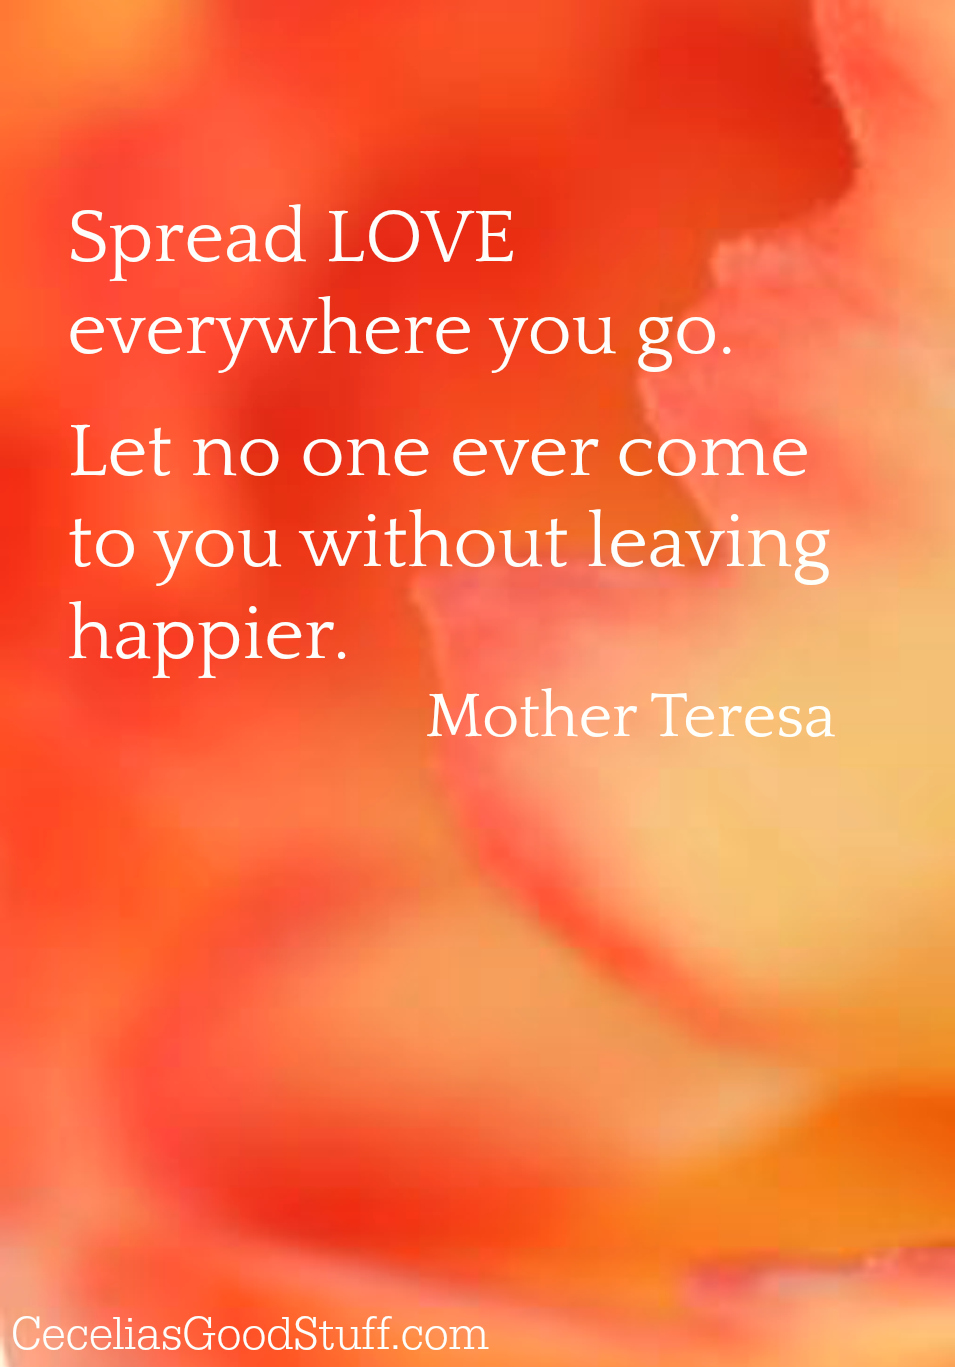 Spread LOVE quote by Mother Teresa | CeceliasGoodStuff.com | Good Food for the Soul